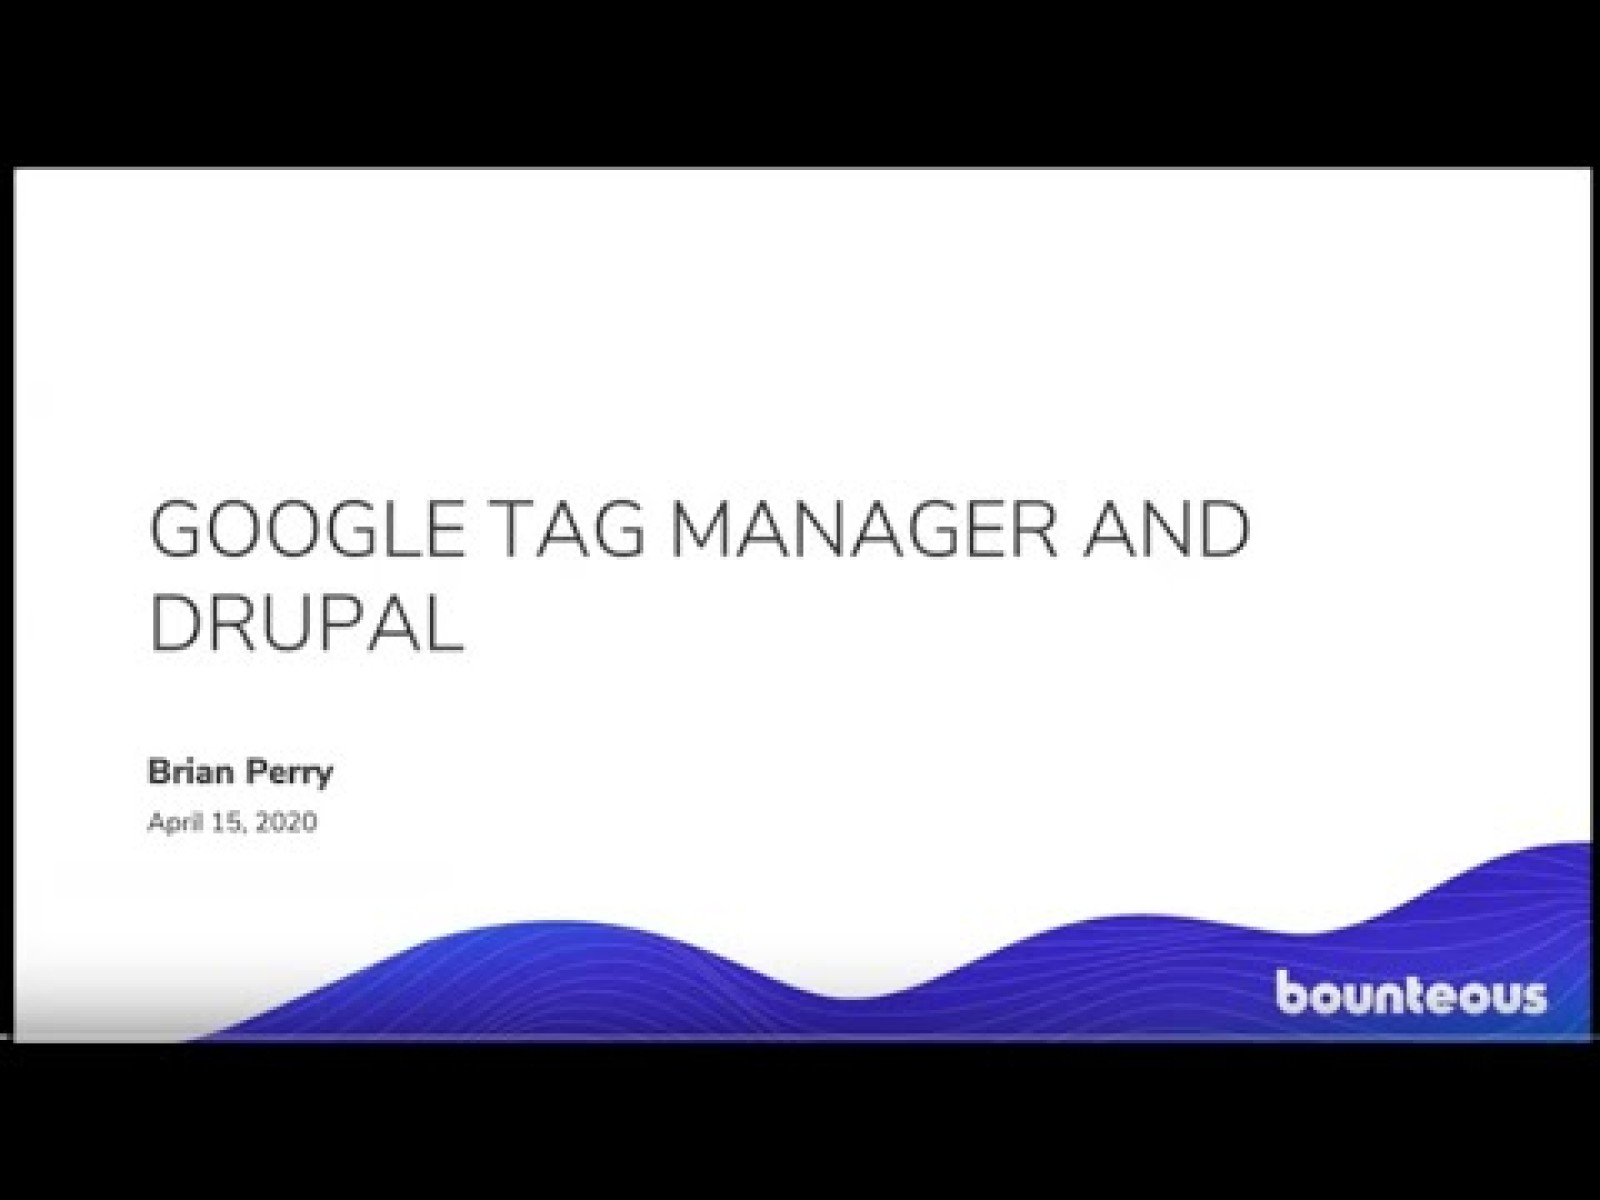 Google Tag Manager and Drupal